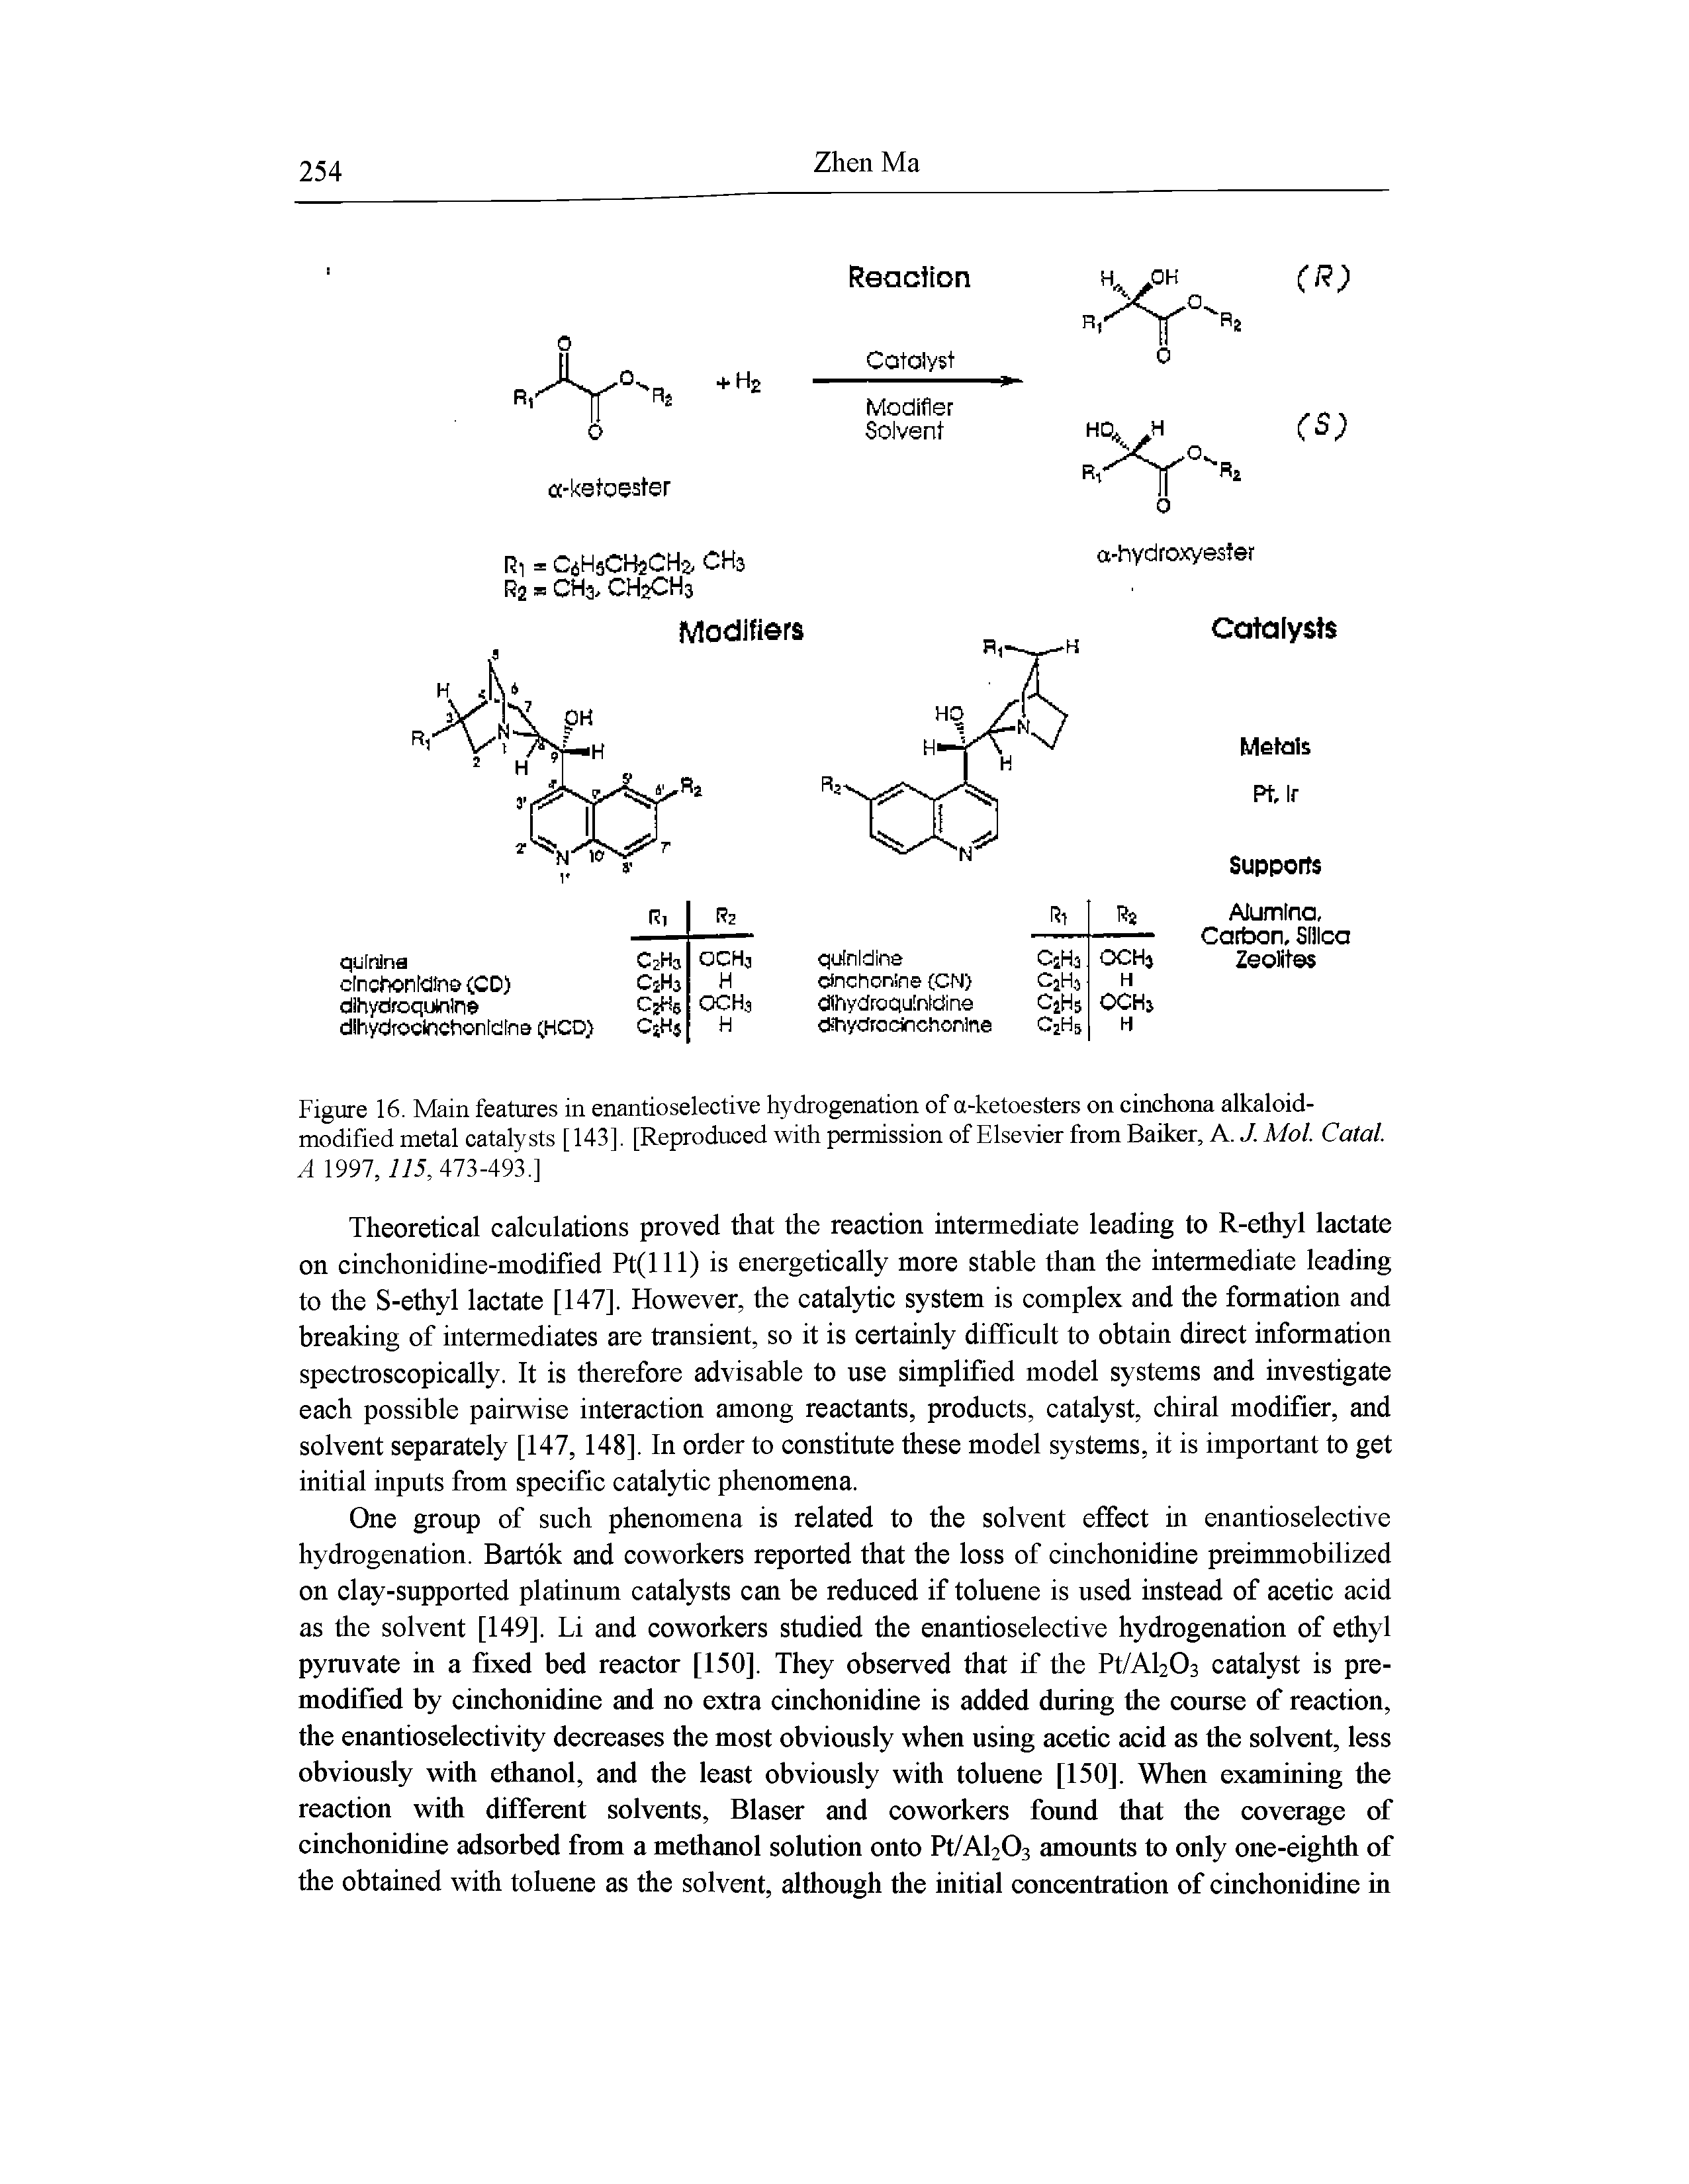 Figure 16. Main features in enantioselective hydrogenation of a-ketoesters on cinchona alkaloid-modified metal catalysts [ 143]. [Reproduced with permission of Elsevier from Baiker, A. J. Mol. Catal. A 1997,115, 473-493.]...